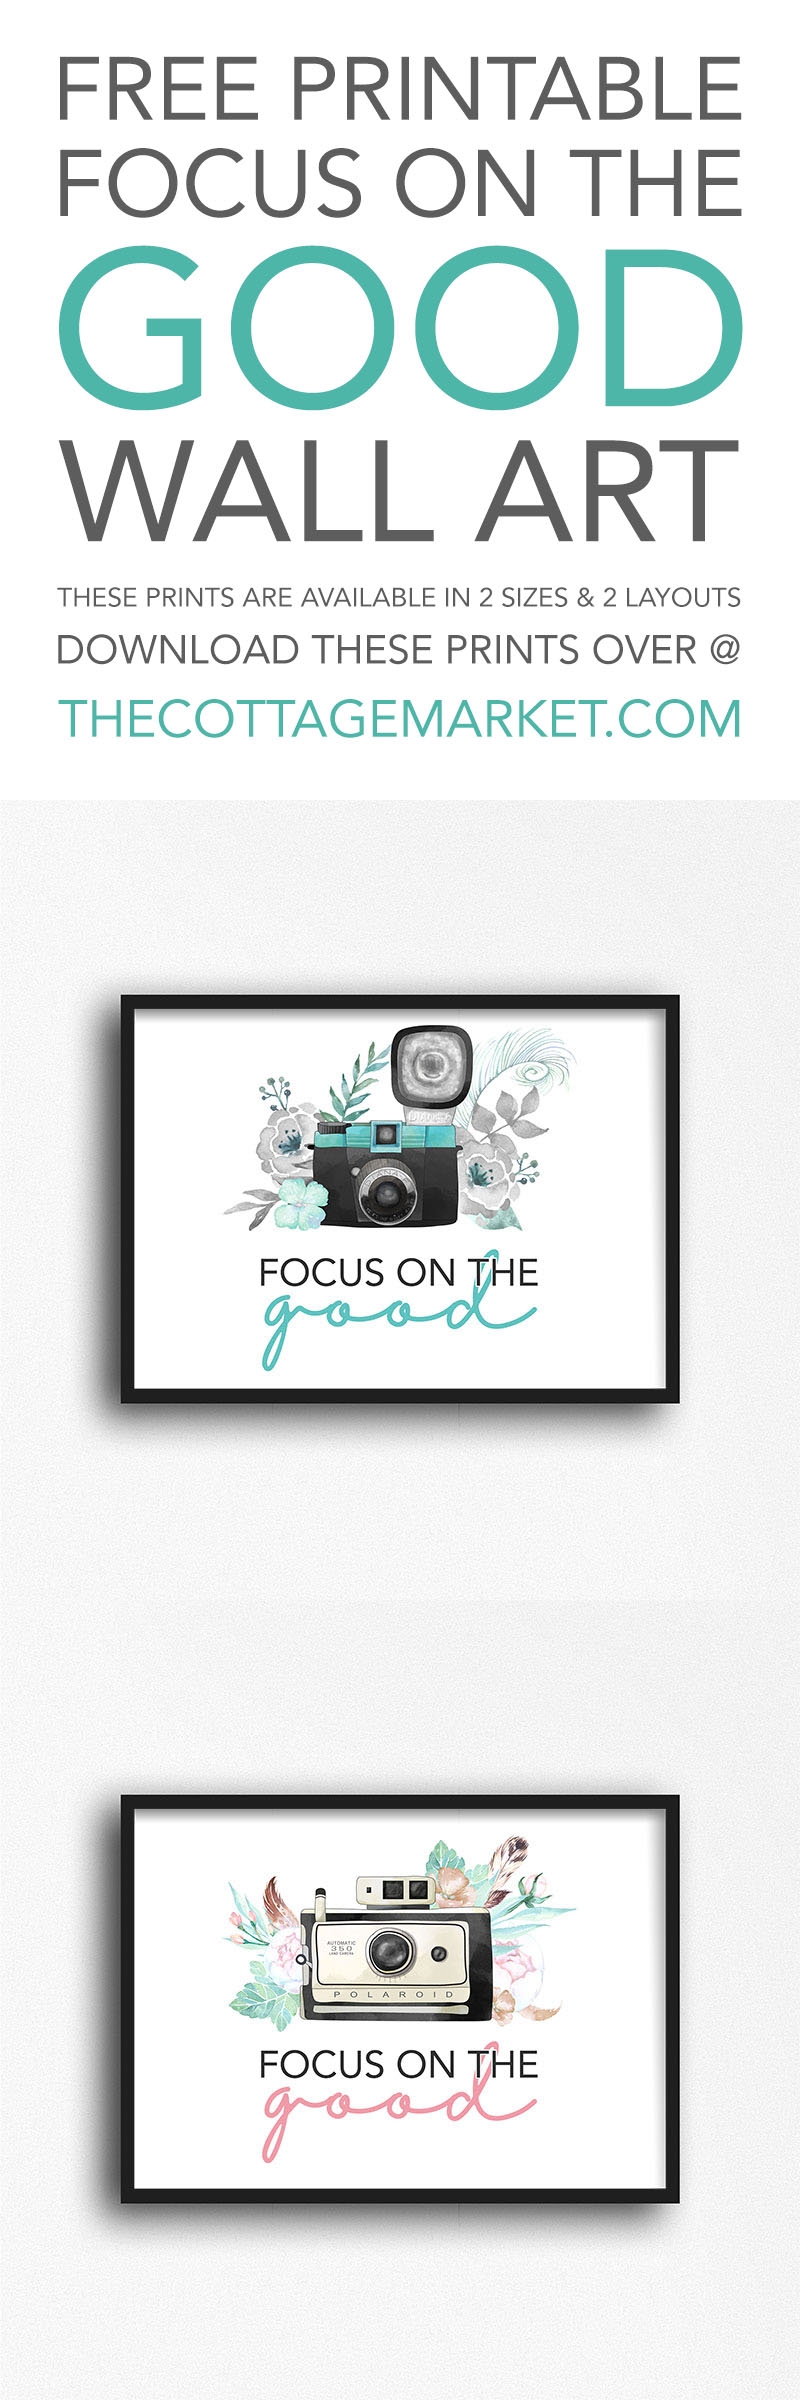 Free Printable Focus On The Good Wall Art The Cottage Market